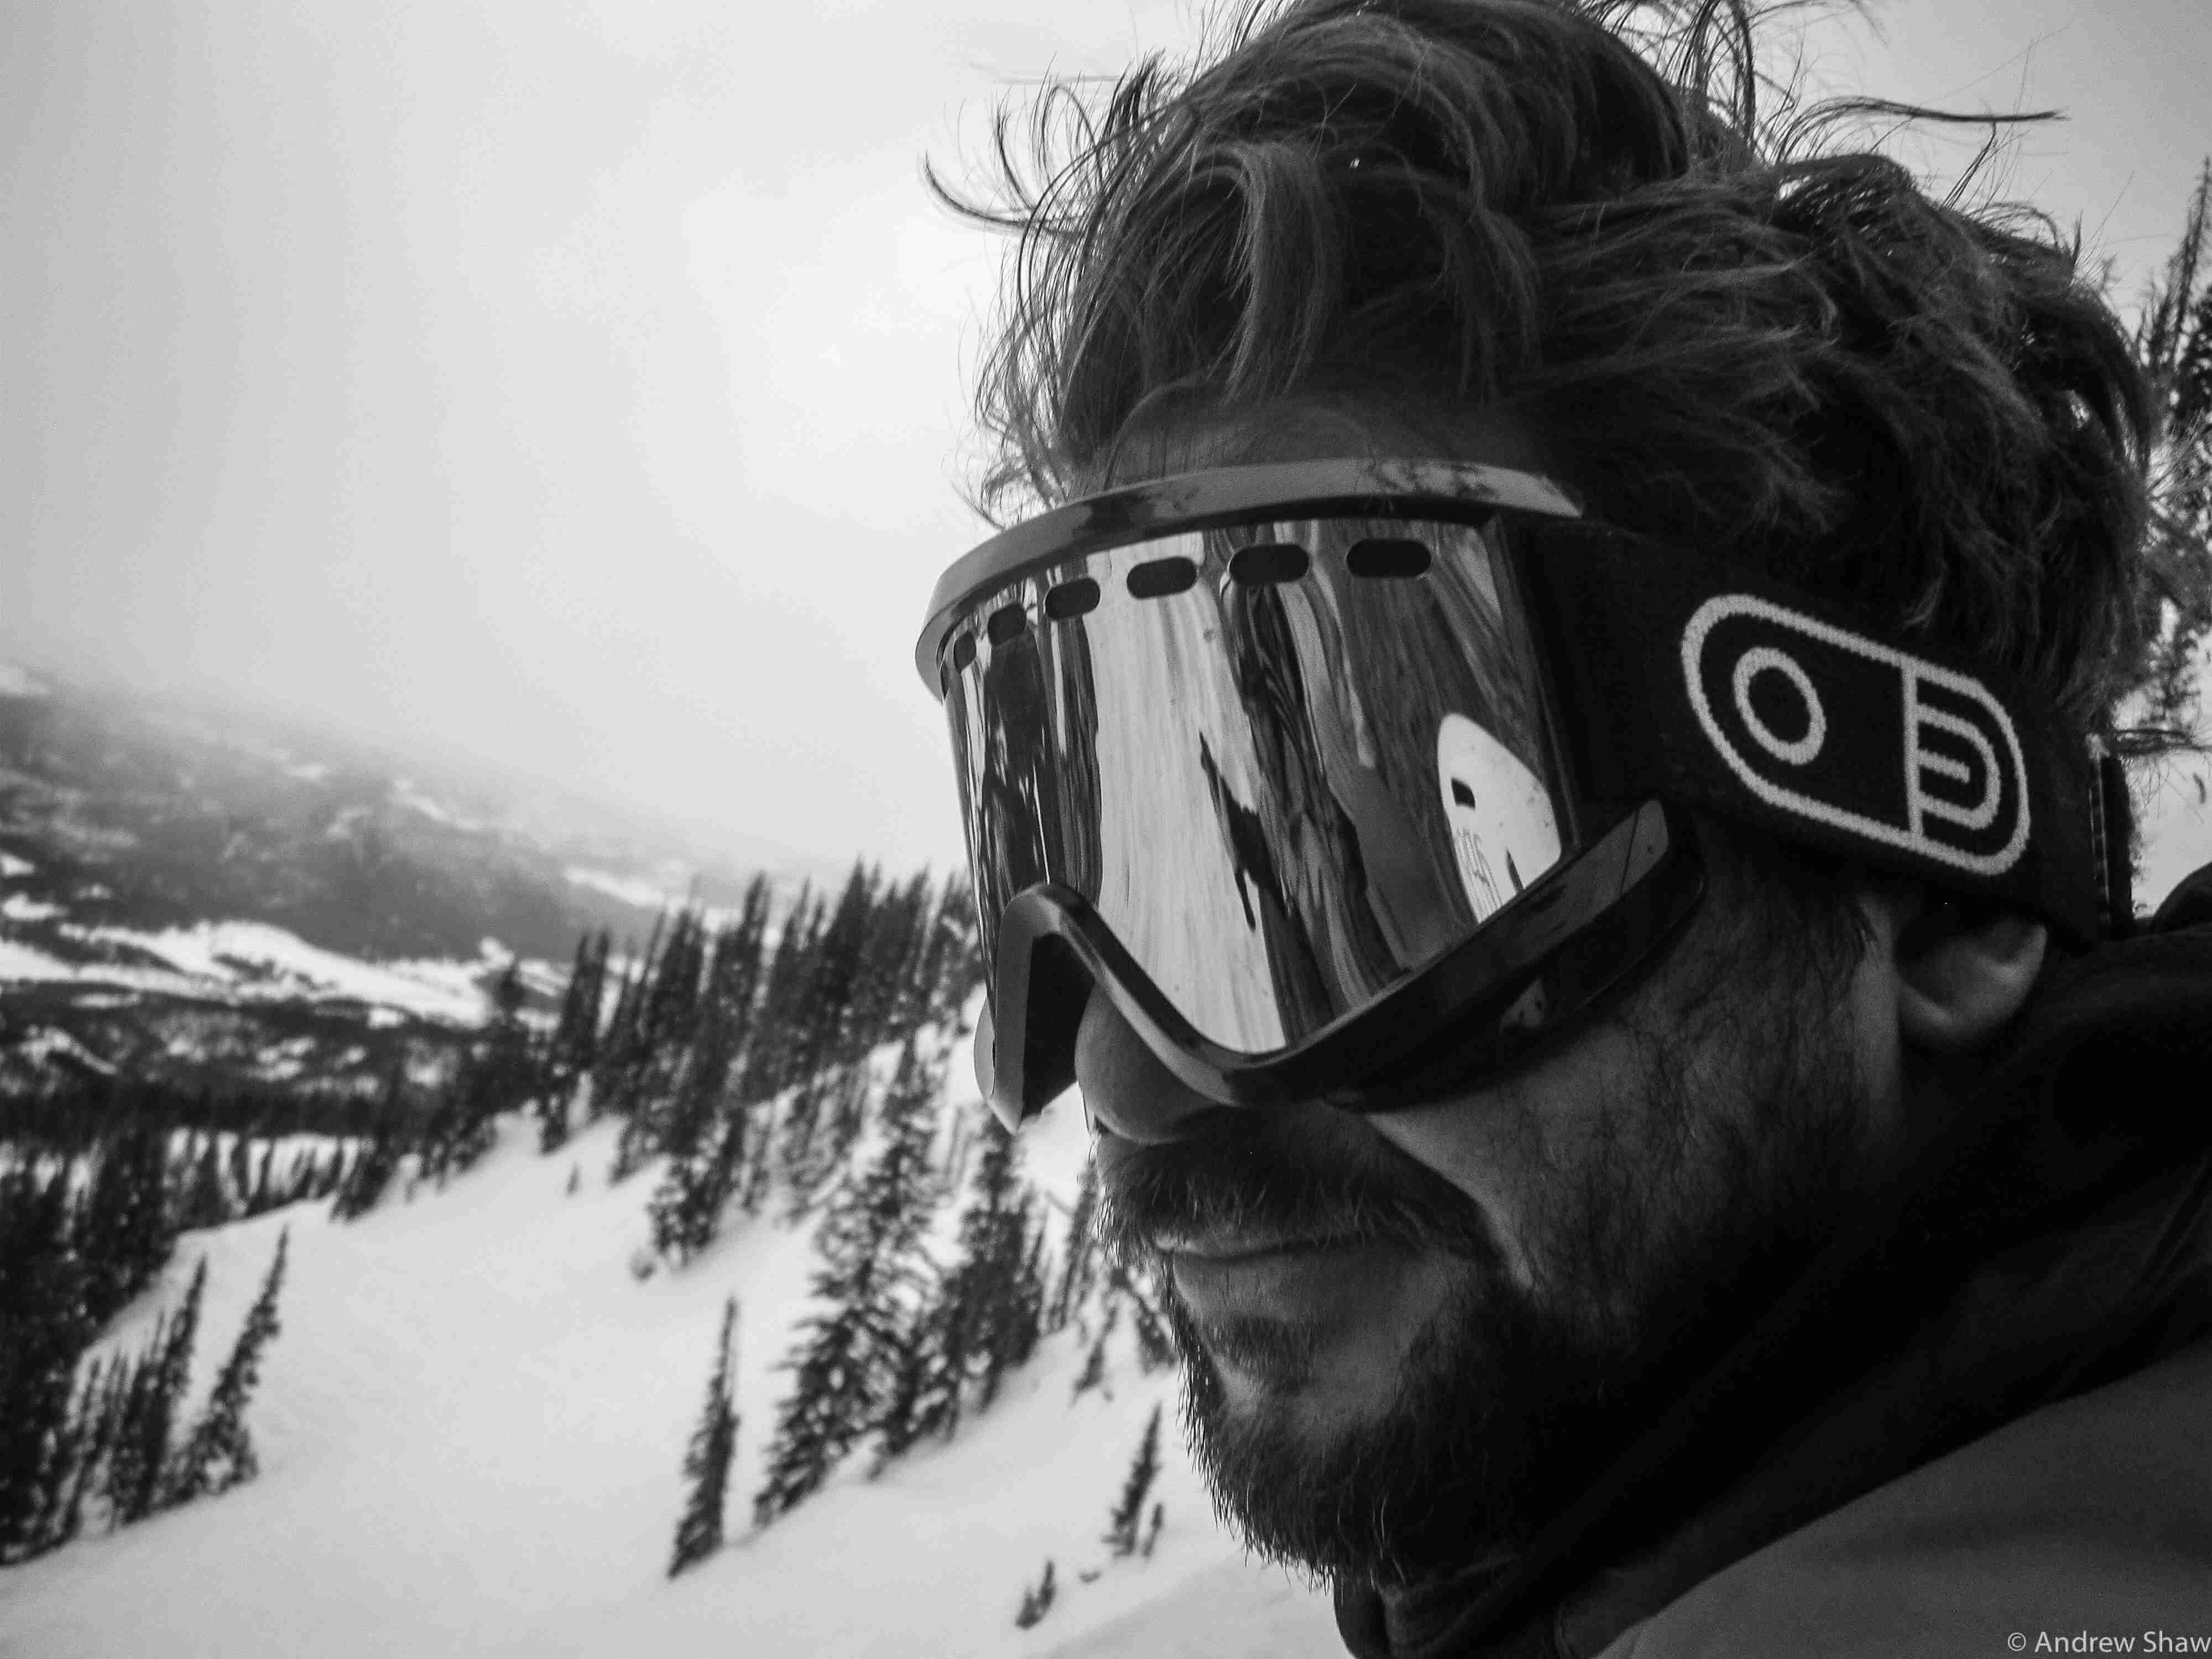 Left side headshot of a person wearing ski goggles, with a snow covered mountain hill behind them - black & white image